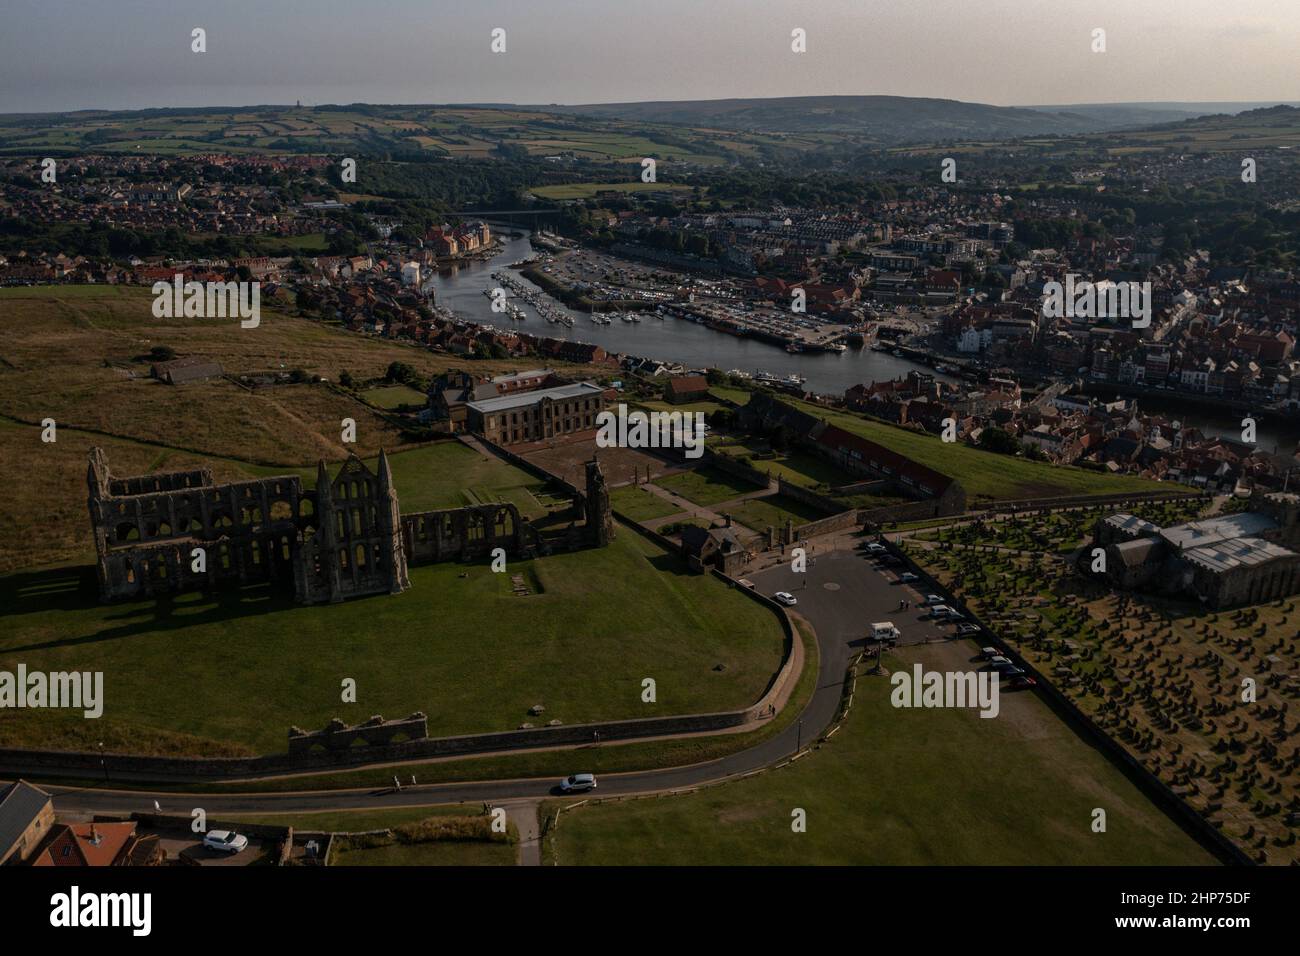 Scarborough , Whitby, Robin Hoods Bay From The Air, Aerial Landscape Drone Photography Stock Photo